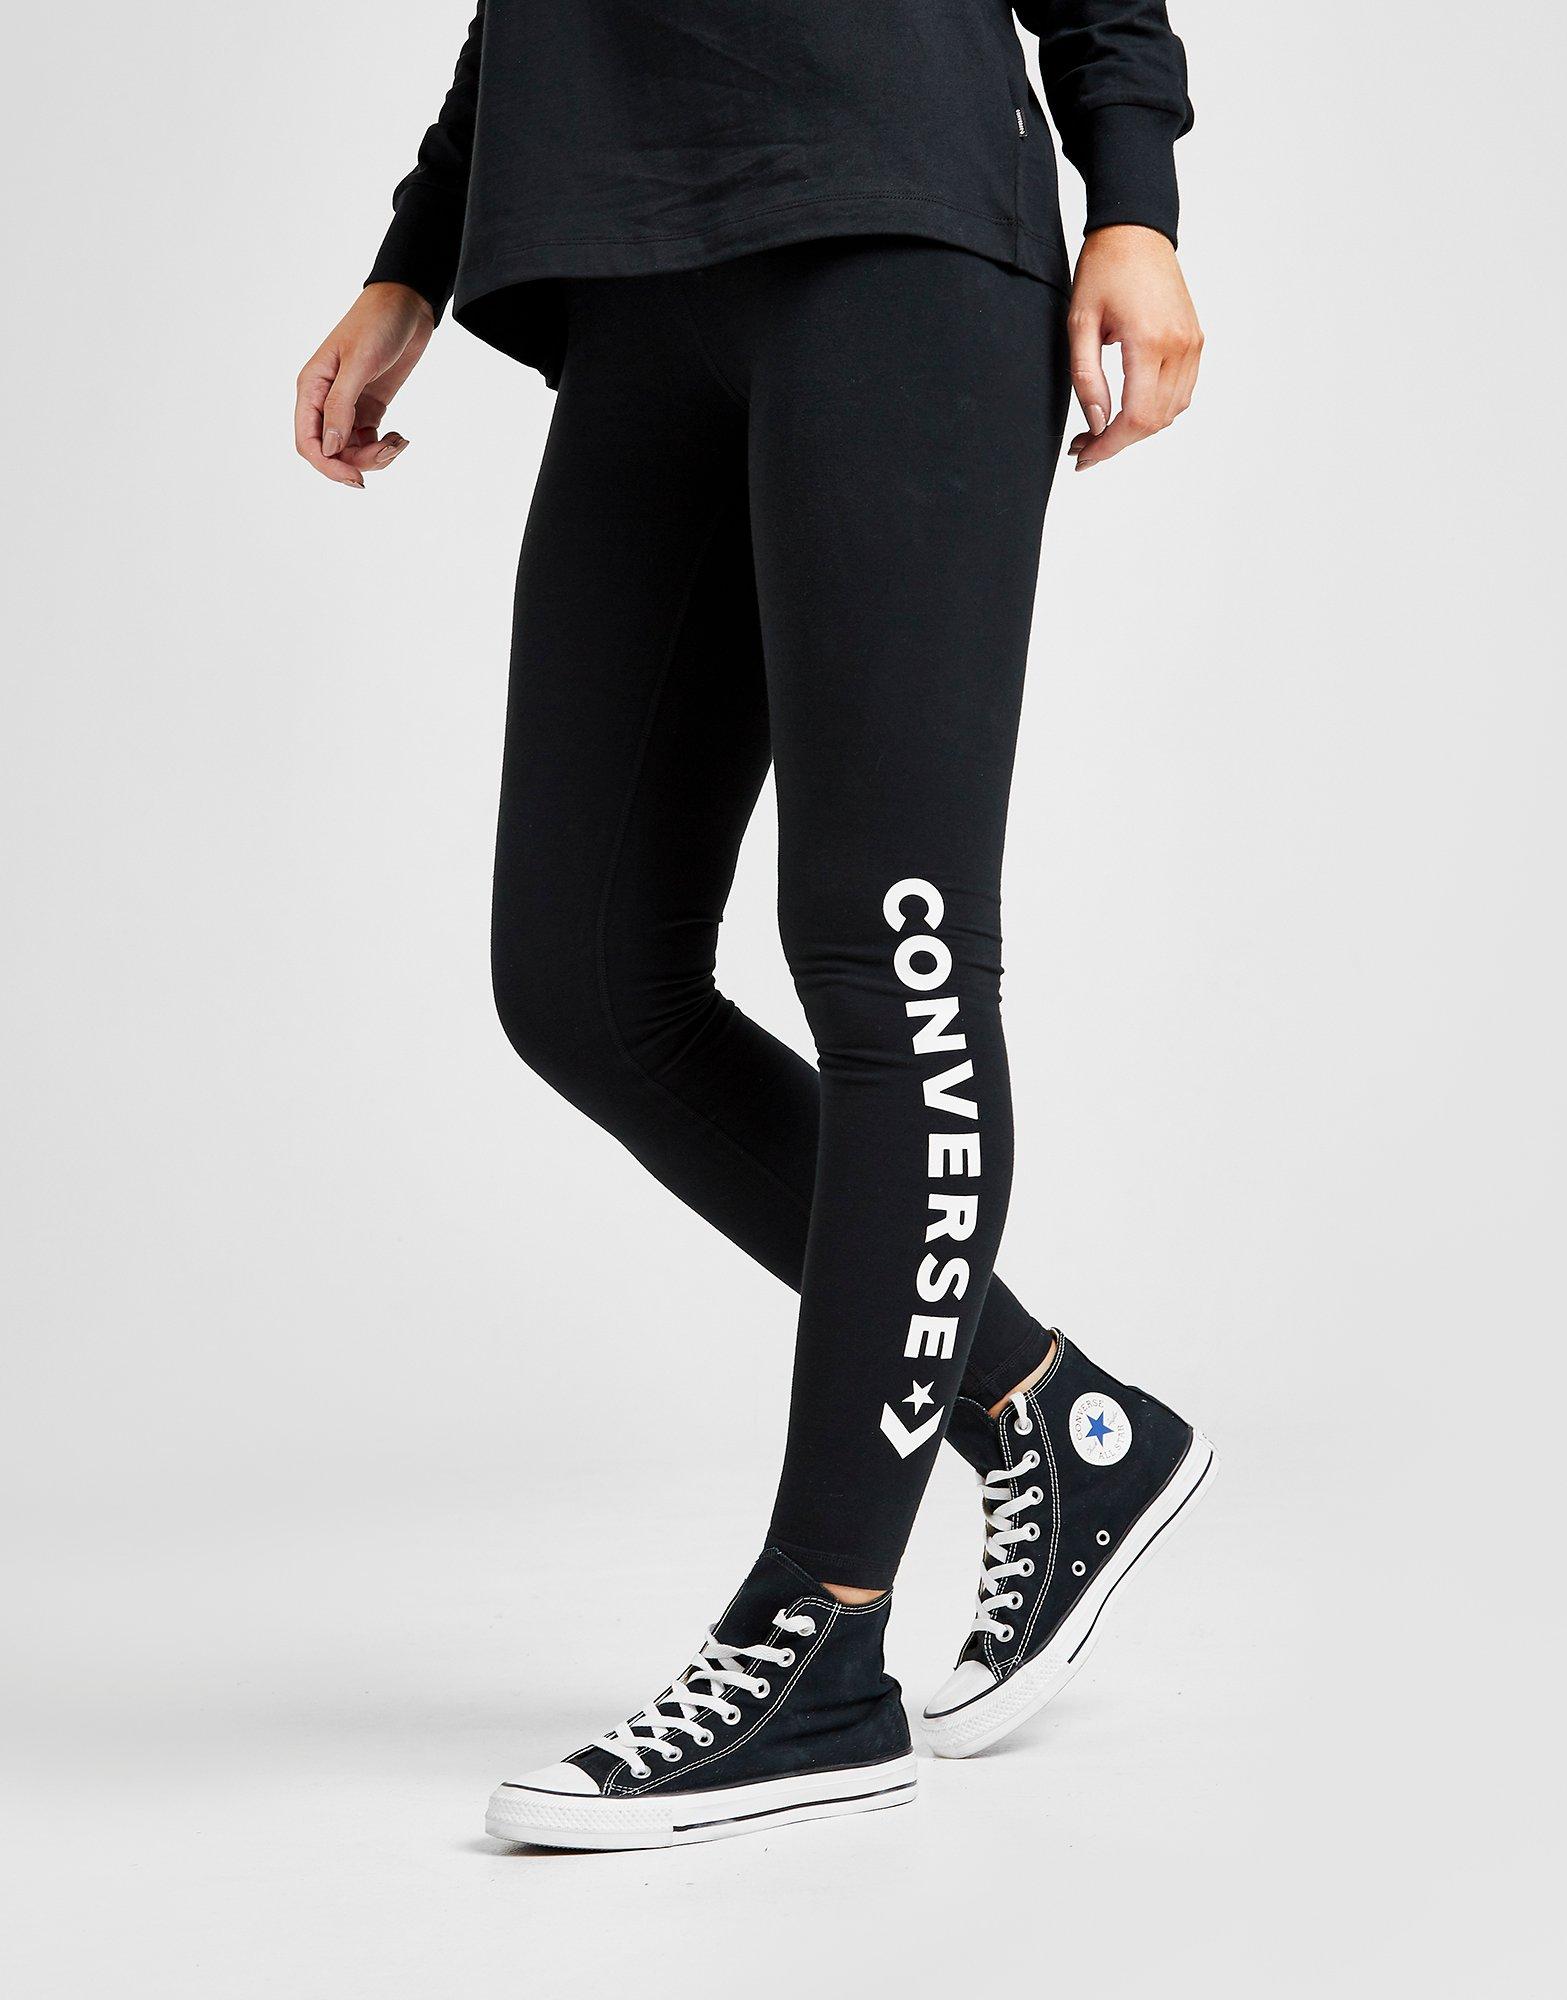 tights with converse